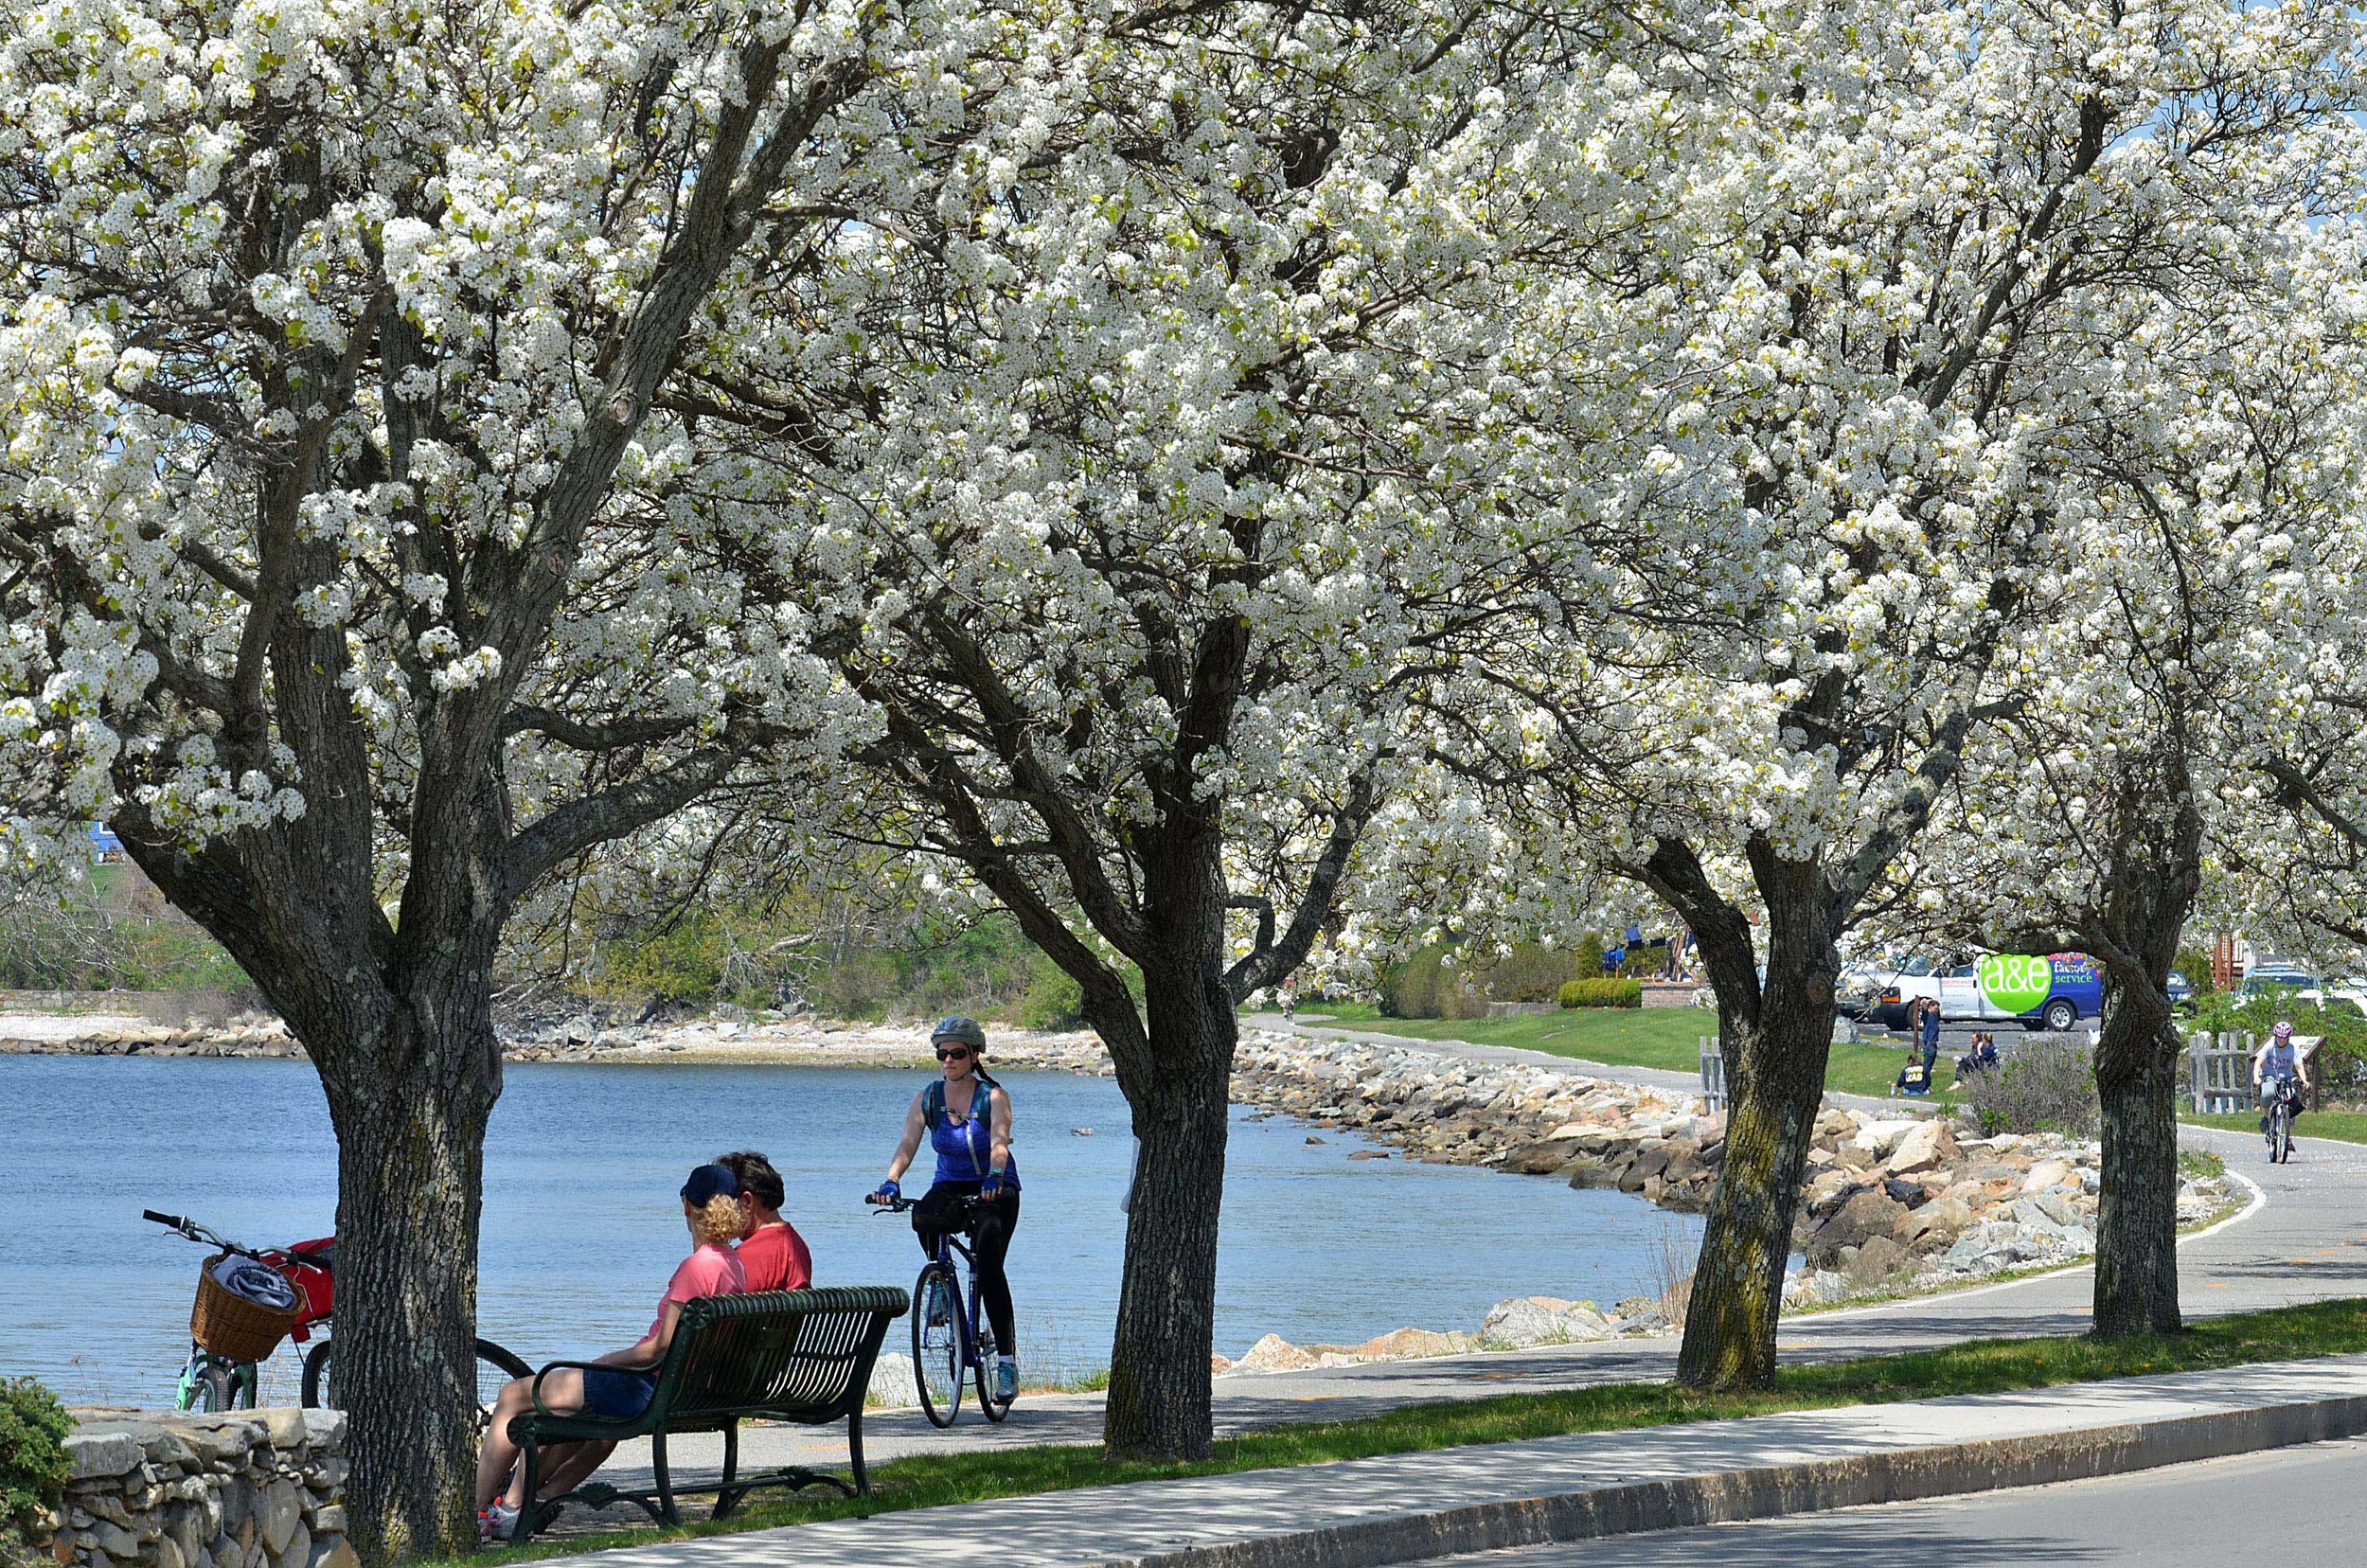 Dogwood trees bloom along Bristol Harbor last spring. The town’s vibrant waterfront contributes to its “most scenic” designation.